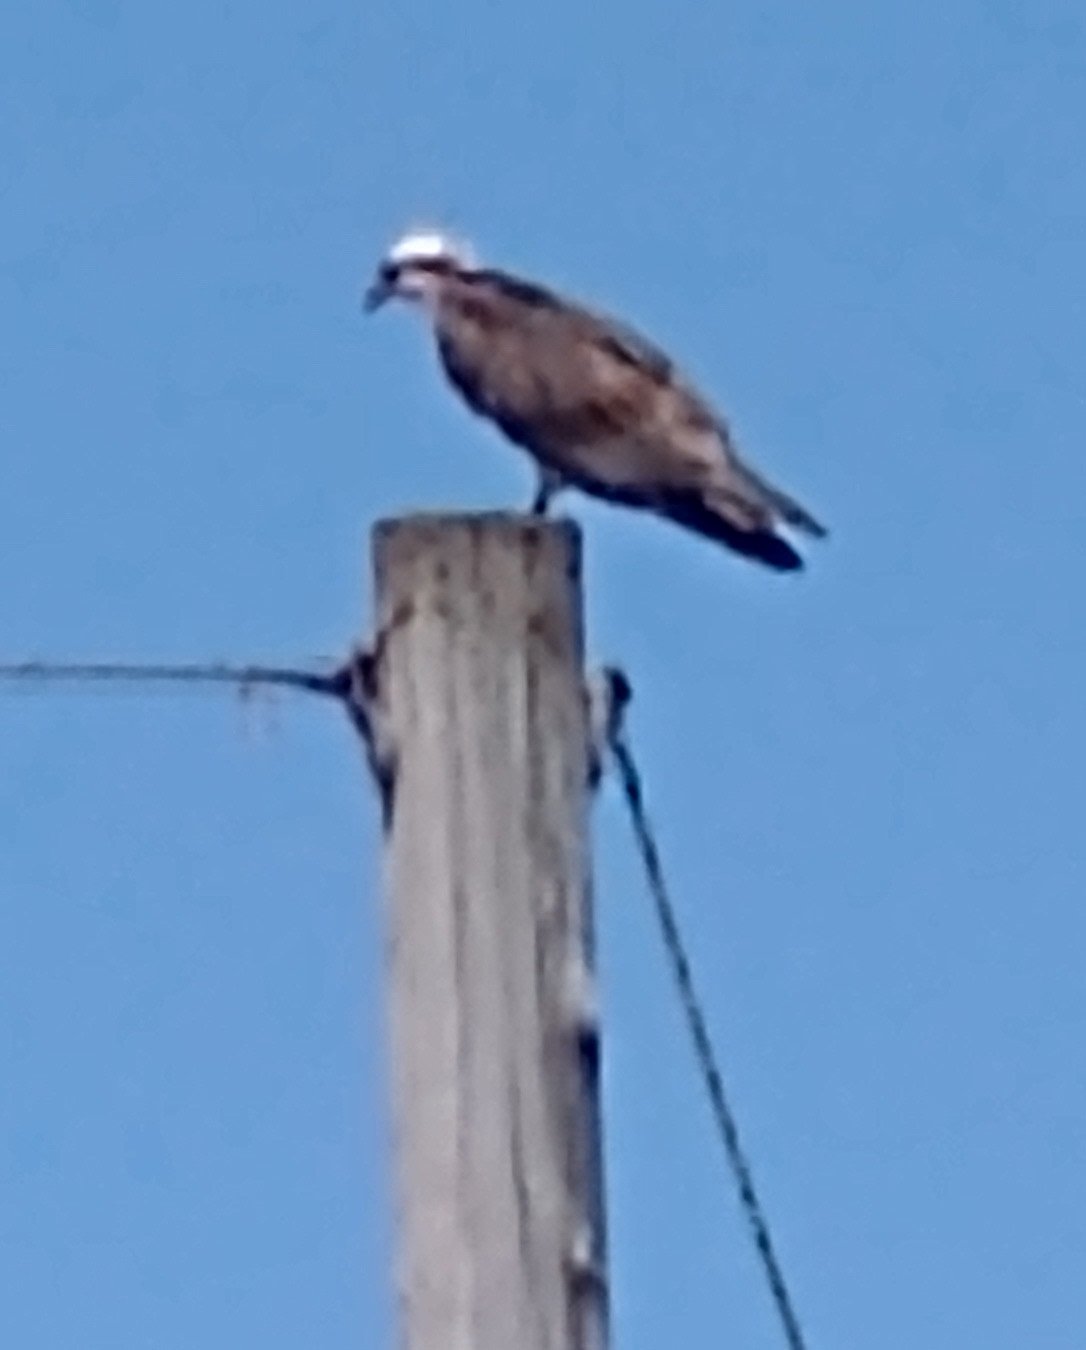 Osprey hanging out on a pole!